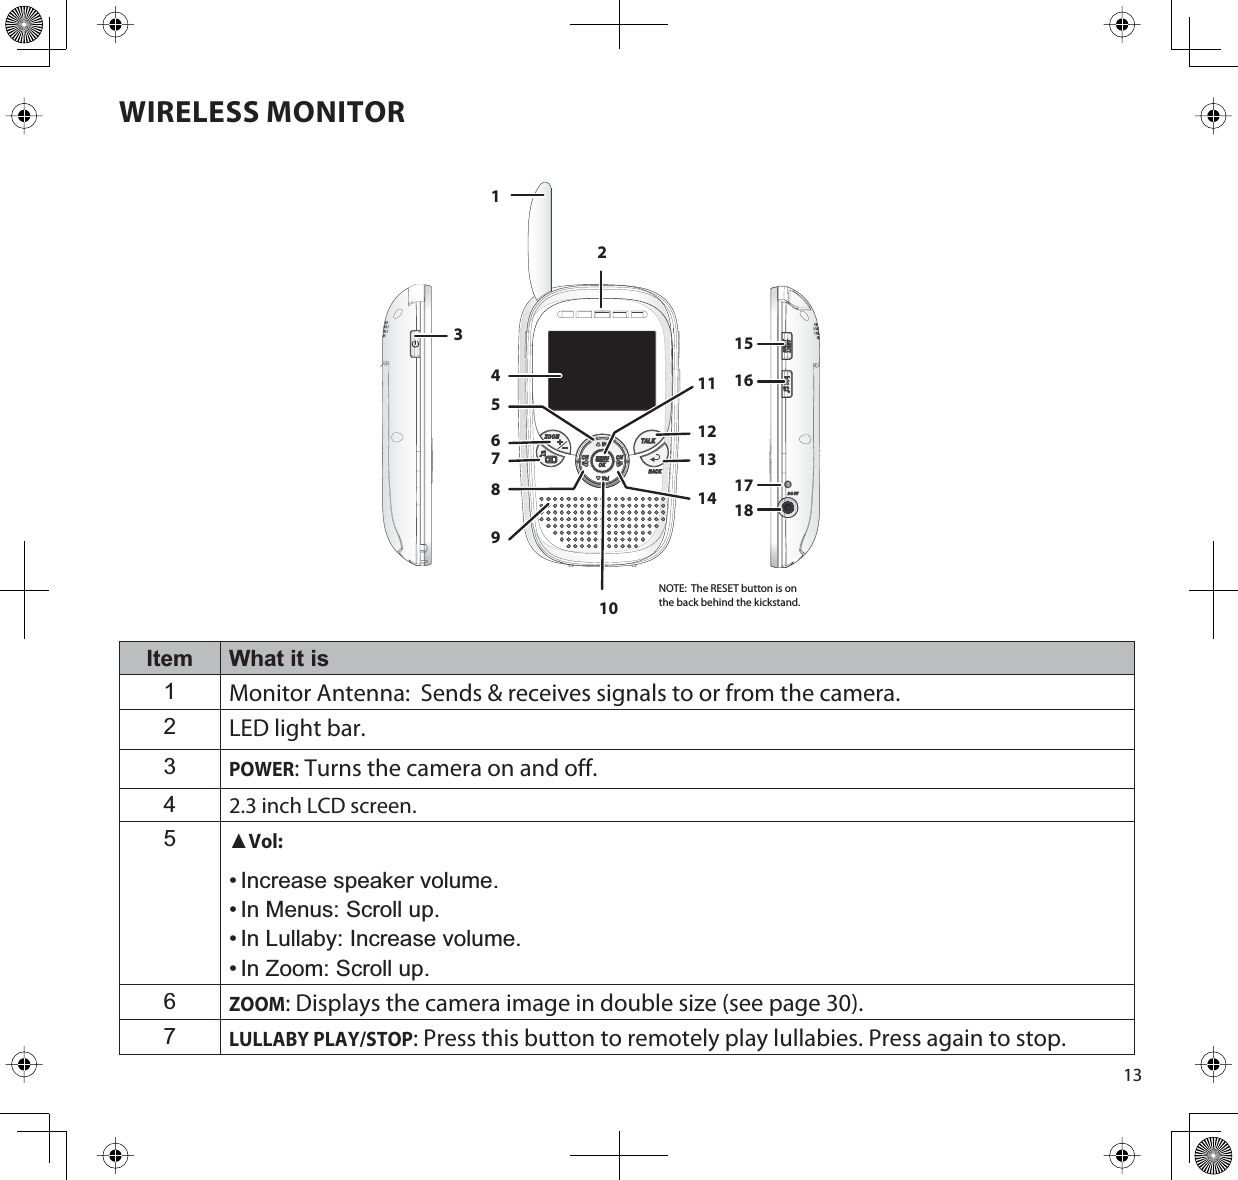 13WIRELESS MONITORItem What it is1Monitor Antenna:  Sends &amp; receives signals to or from the camera.2LED light bar.3POWER: Turns the camera on and off.42.3 inch LCD screen.5ŸVol:• Increase speaker volume.• In Menus: Scroll up.• In Lullaby: Increase volume.• In Zoom: Scroll up.6ZOOM: Displays the camera image in double size (see page 30).7LULLABY PLAY/STOP: Press this button to remotely play lullabies. Press again to stop.132456781011121314151617189NOTE:  The RESET button is on the back behind the kickstand.